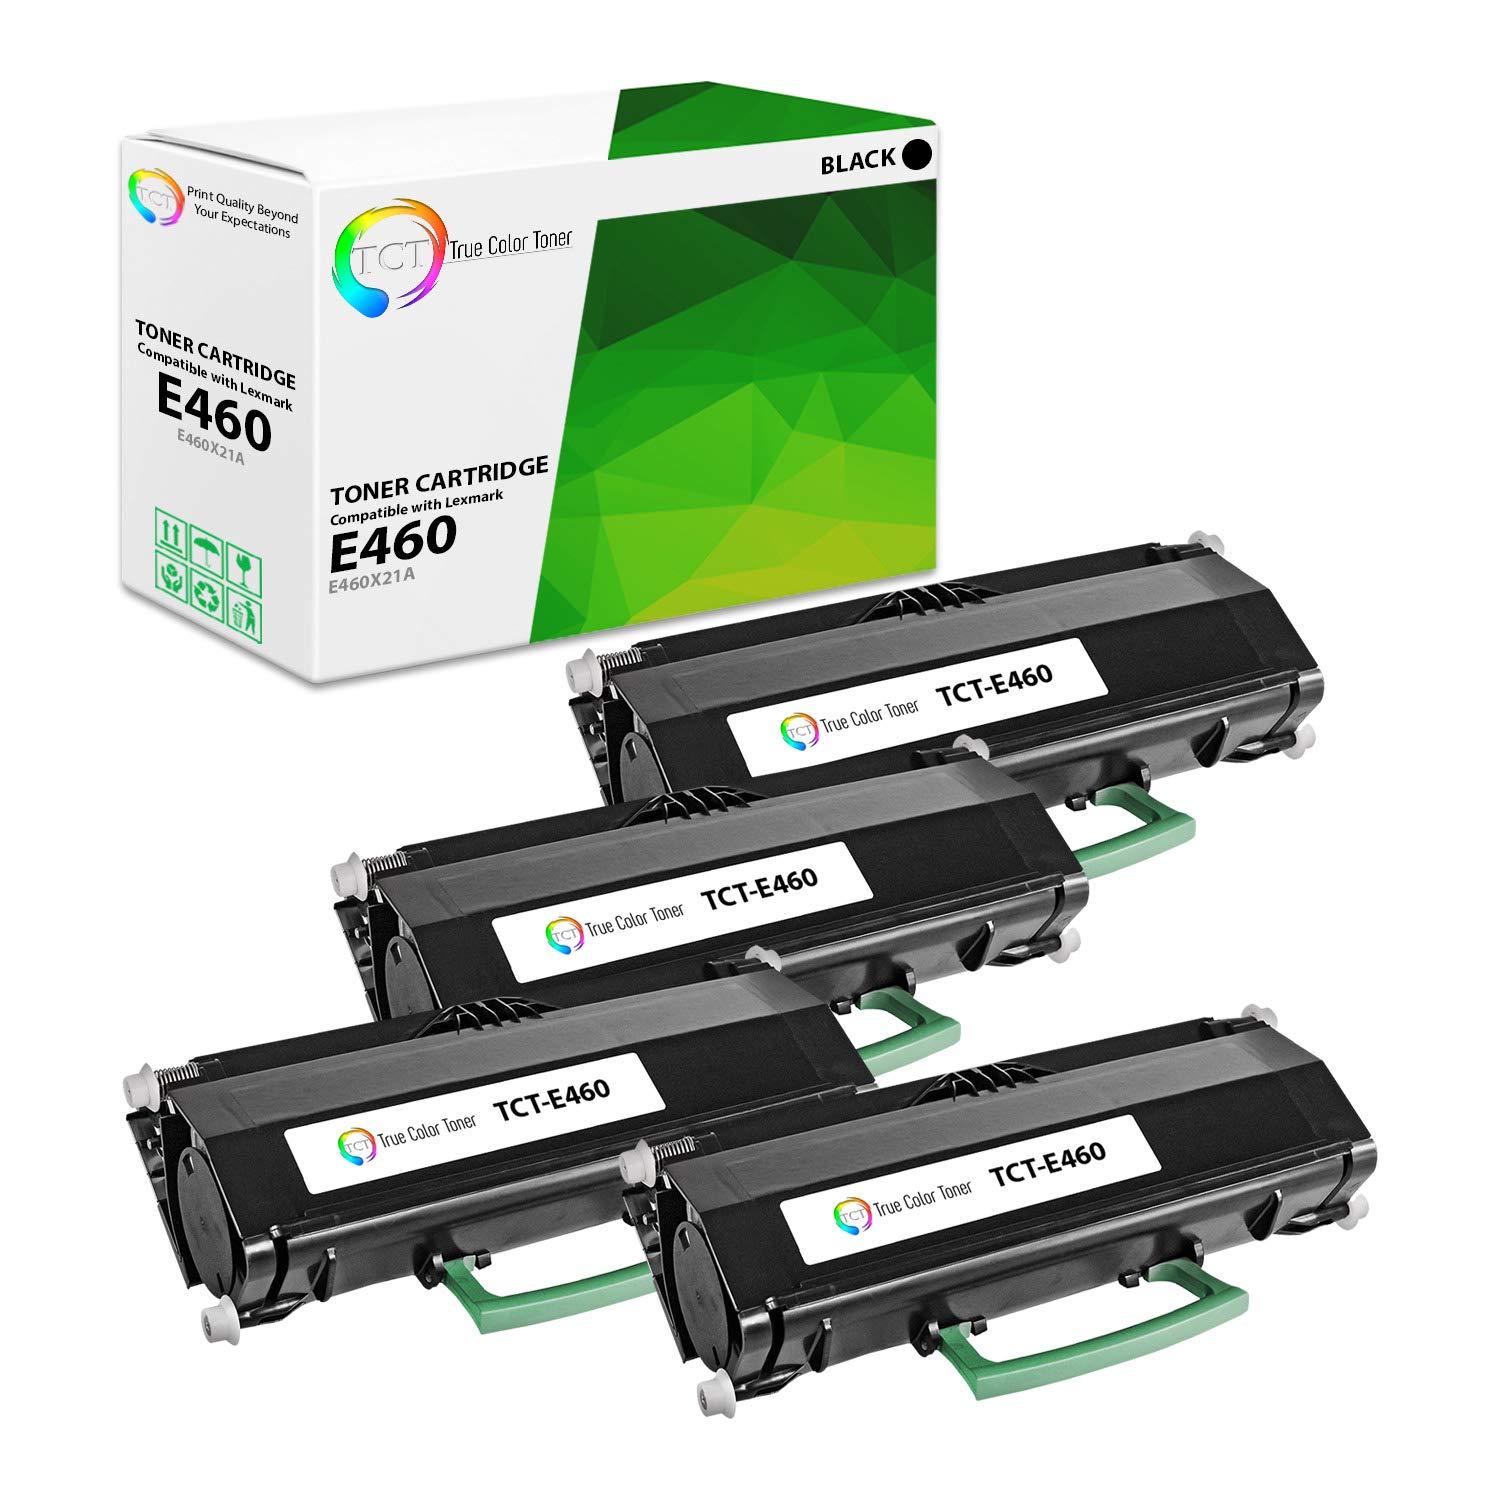 Looking to Buy Lexmark Toner Cartridges This Year. Check Out These 10 Must-Know Tips